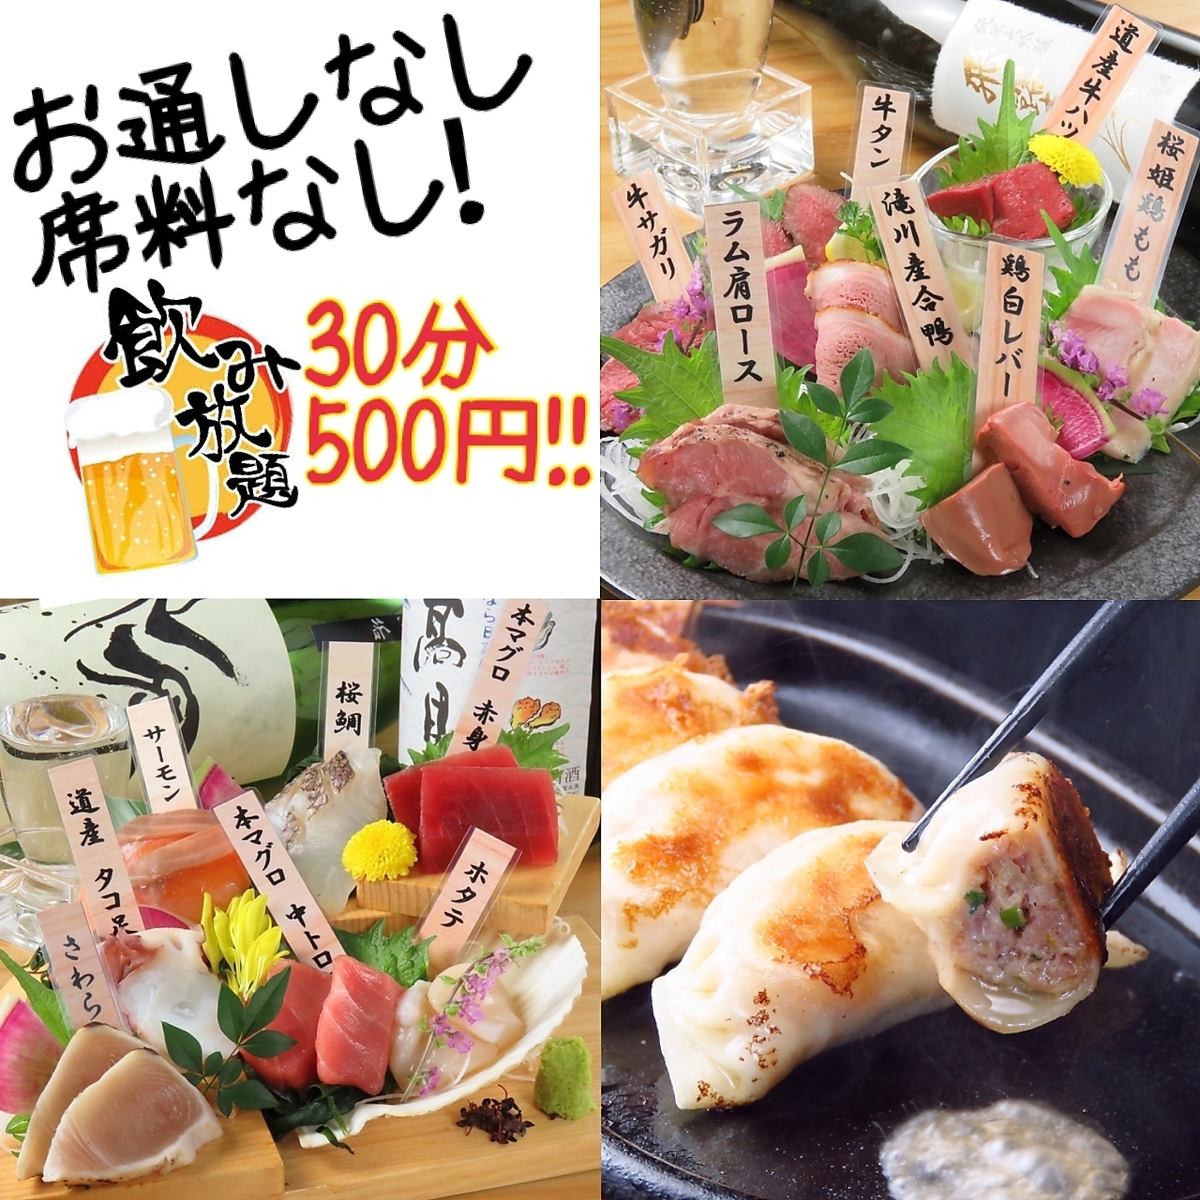 2 minutes walk from Susukino! Fresh meat and fish, all-you-can-drink for 500 yen for 30 minutes ◎